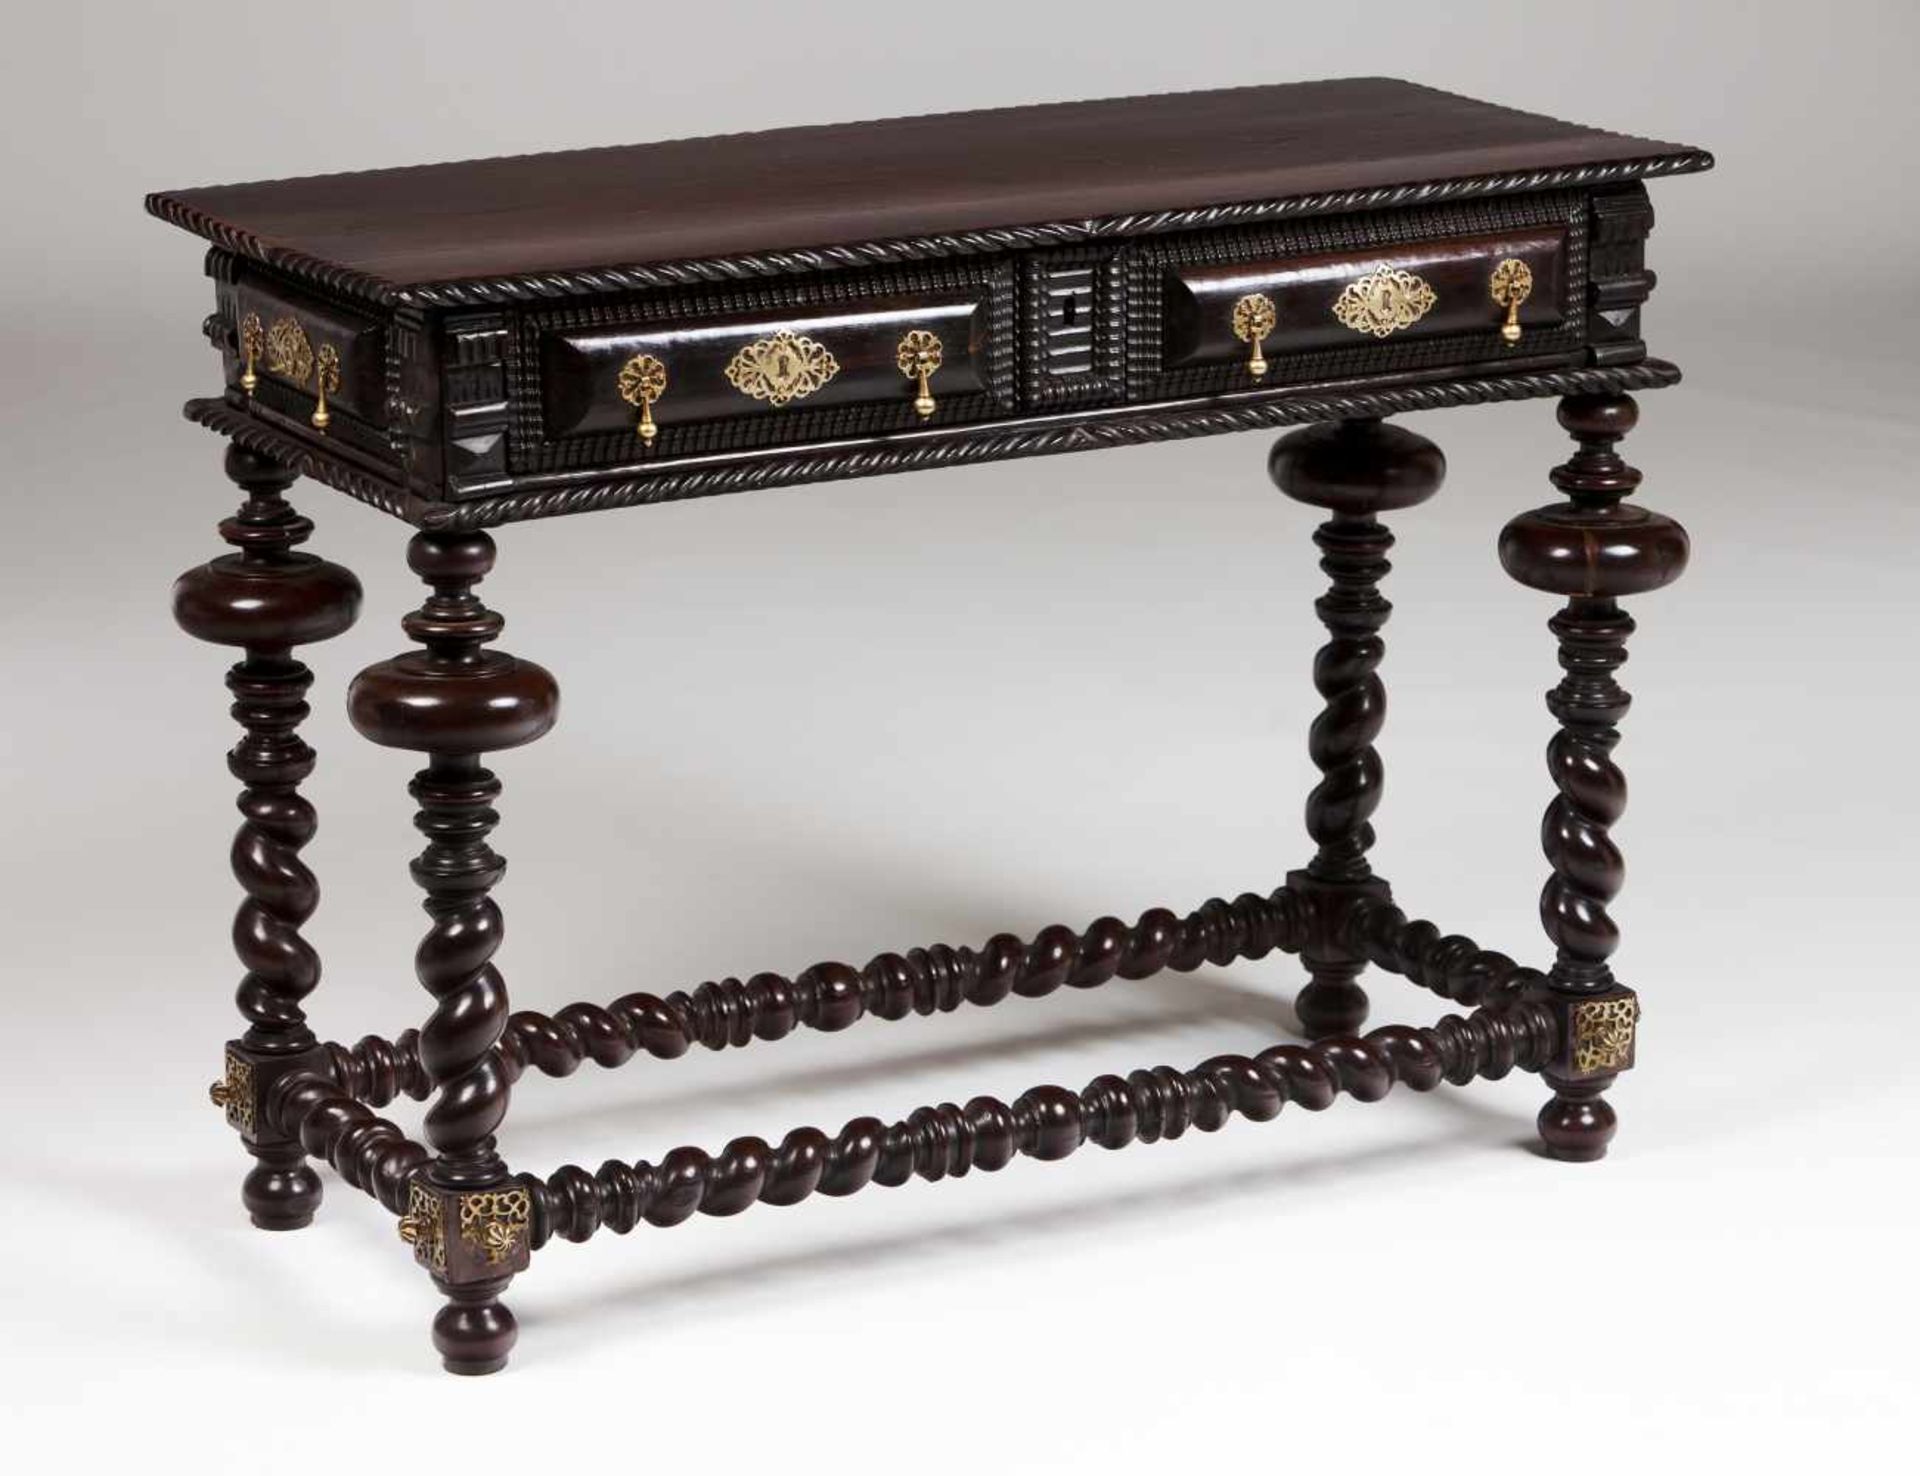 A "bufete" tableVeneered in rosewood and other timbersTwo drawers simulating sixCarved